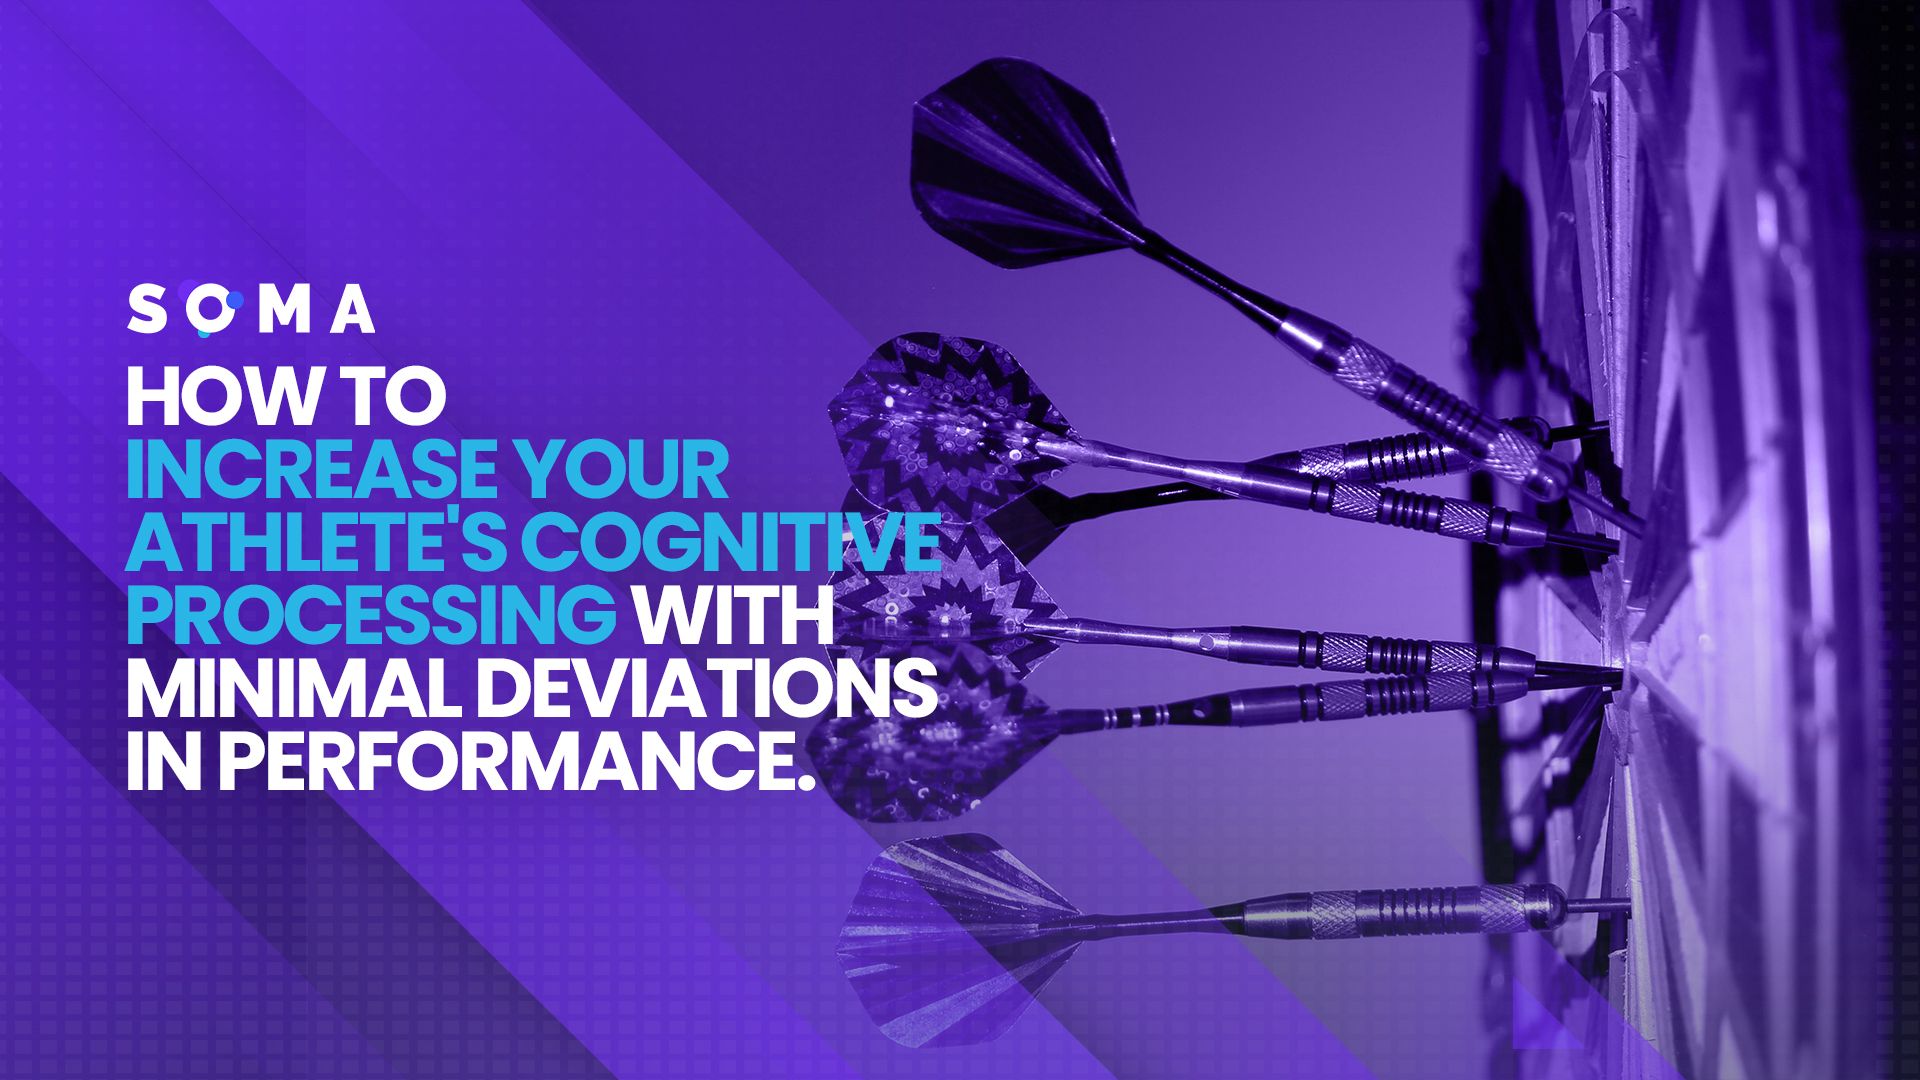 How To Increase Your Athlete's Cognitive Processing With Minimal Deviations In Performance.